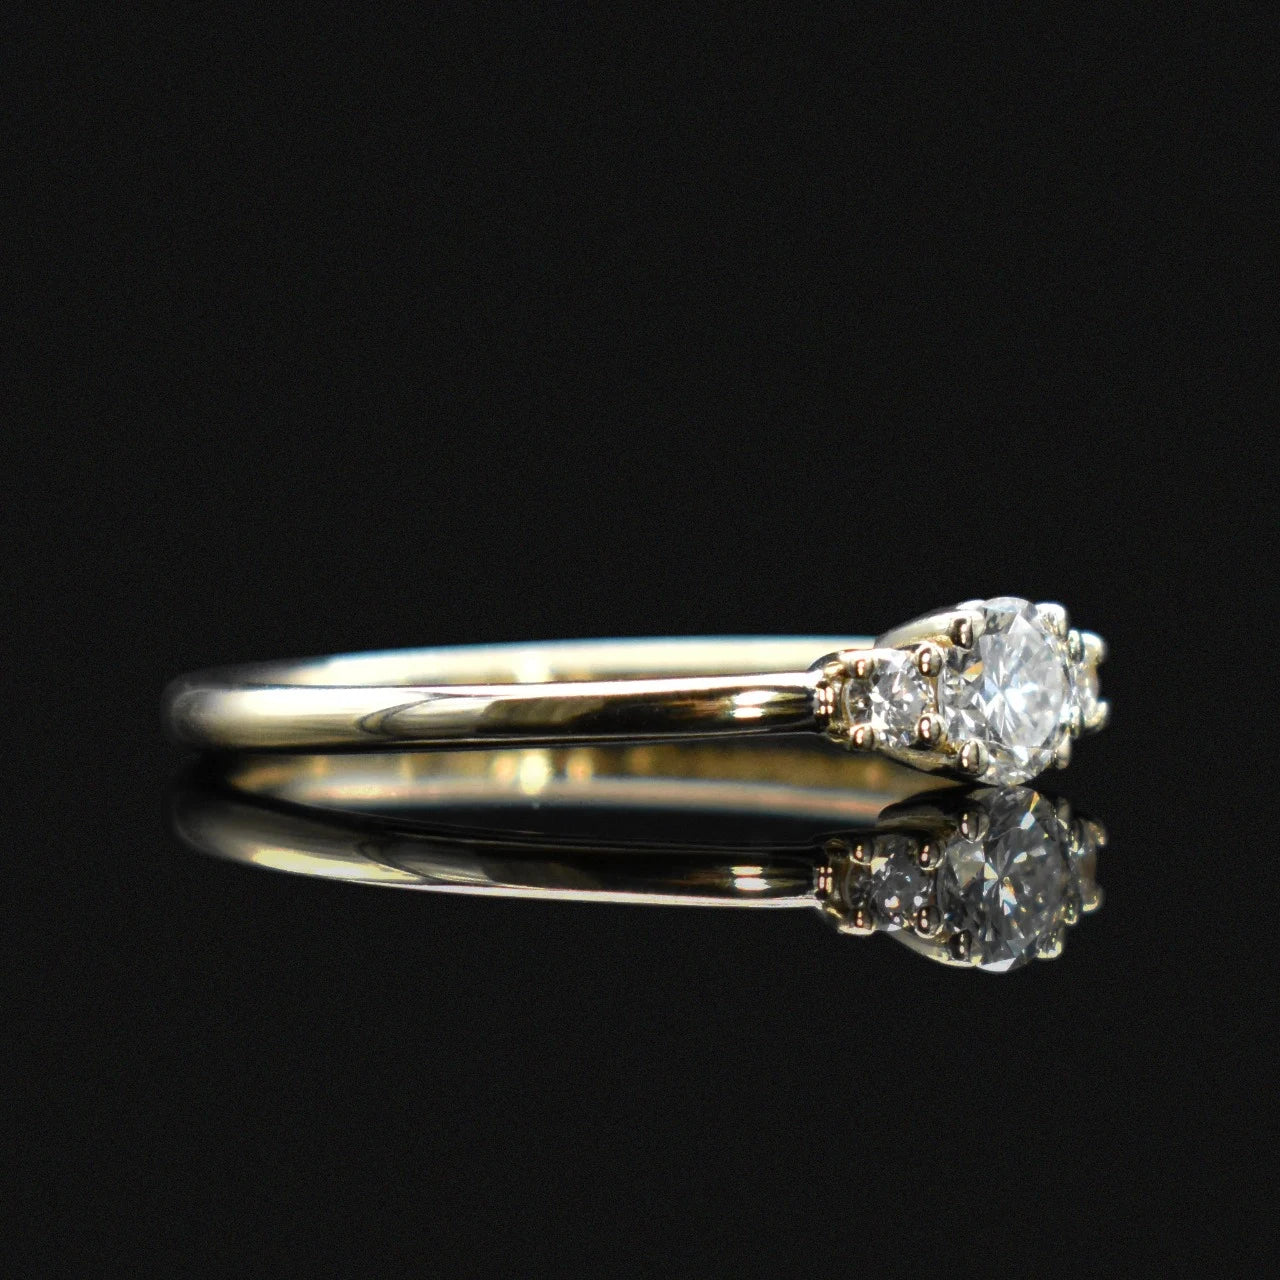 ashes diamond cremation ring 3 stone minimal classic gold momento loved one pet